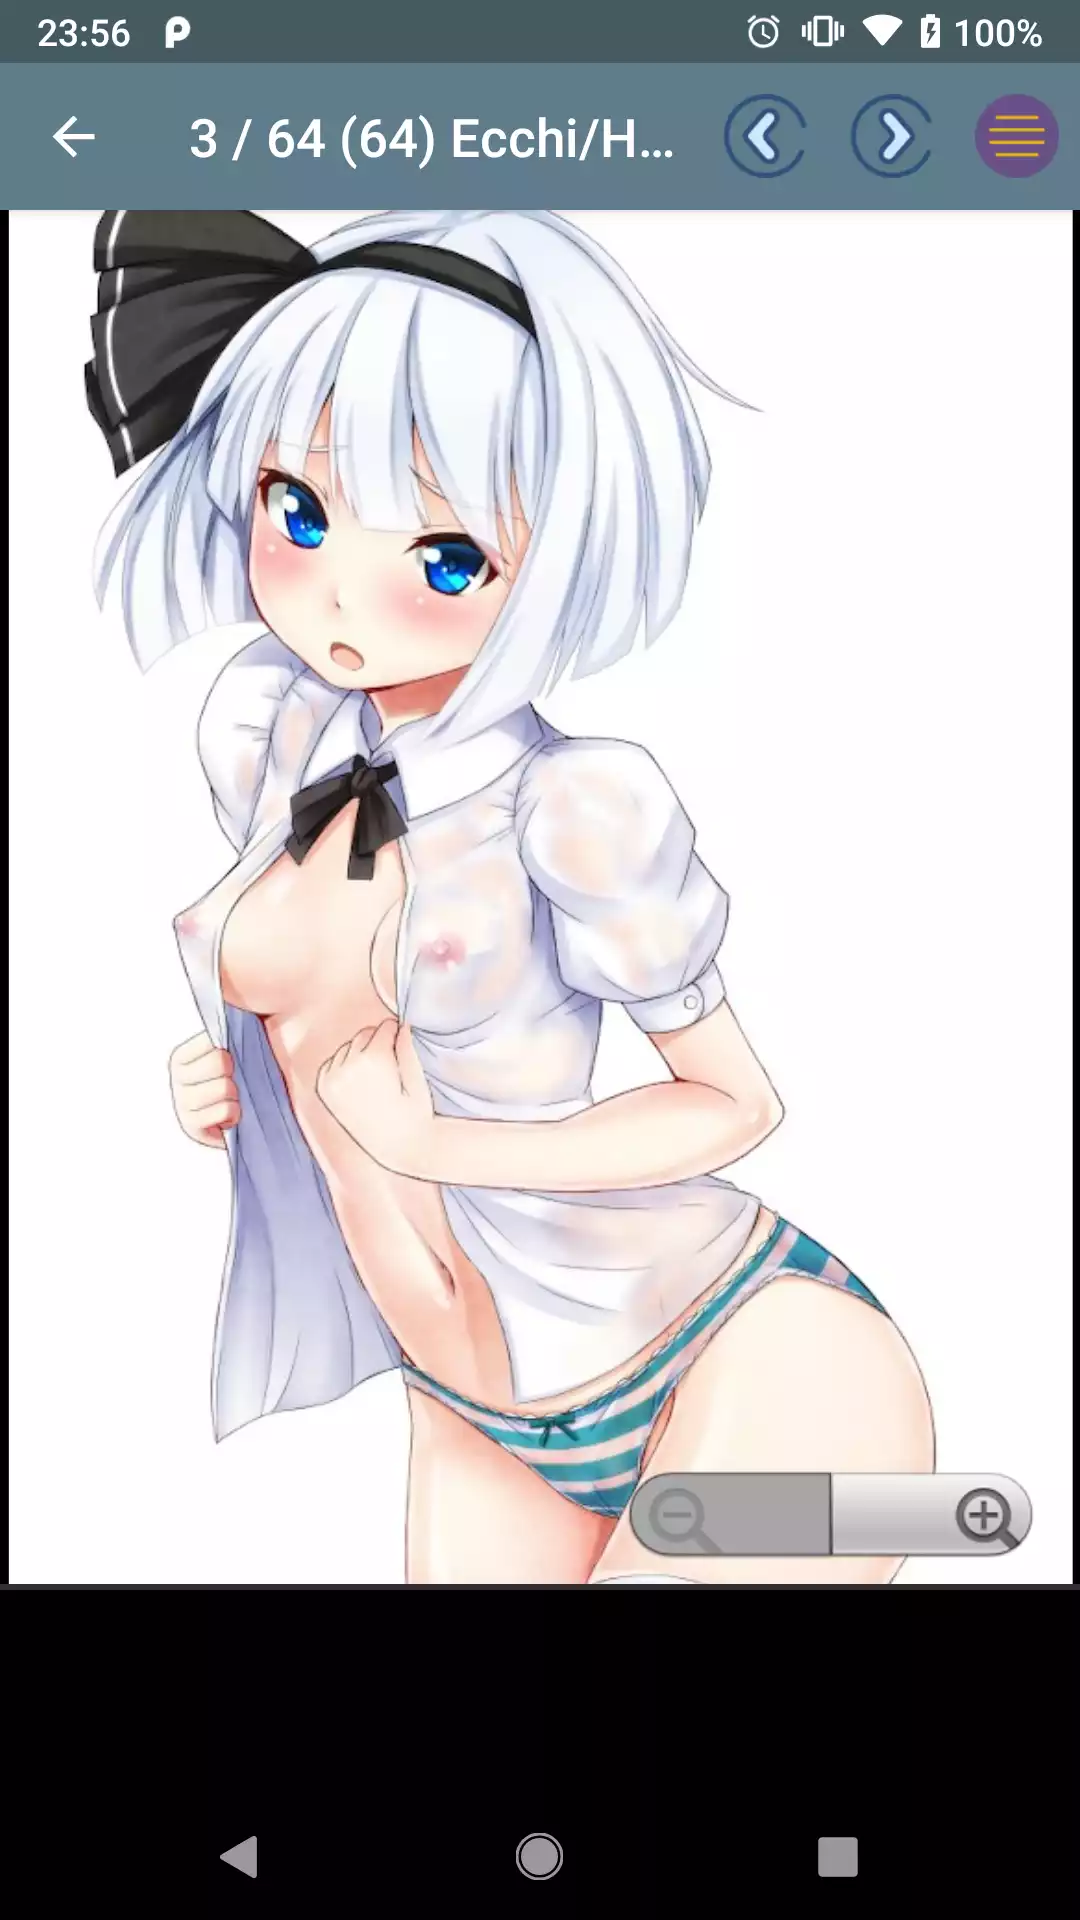 Hentai Galleries Packs anime,apk,apps,sissy,pictures,pic,hentai,android,best,sexy,strategic,girls,pornstar,covering,galleries,drawings,download,site,free,gallery,porn,app,henti,henta,pics